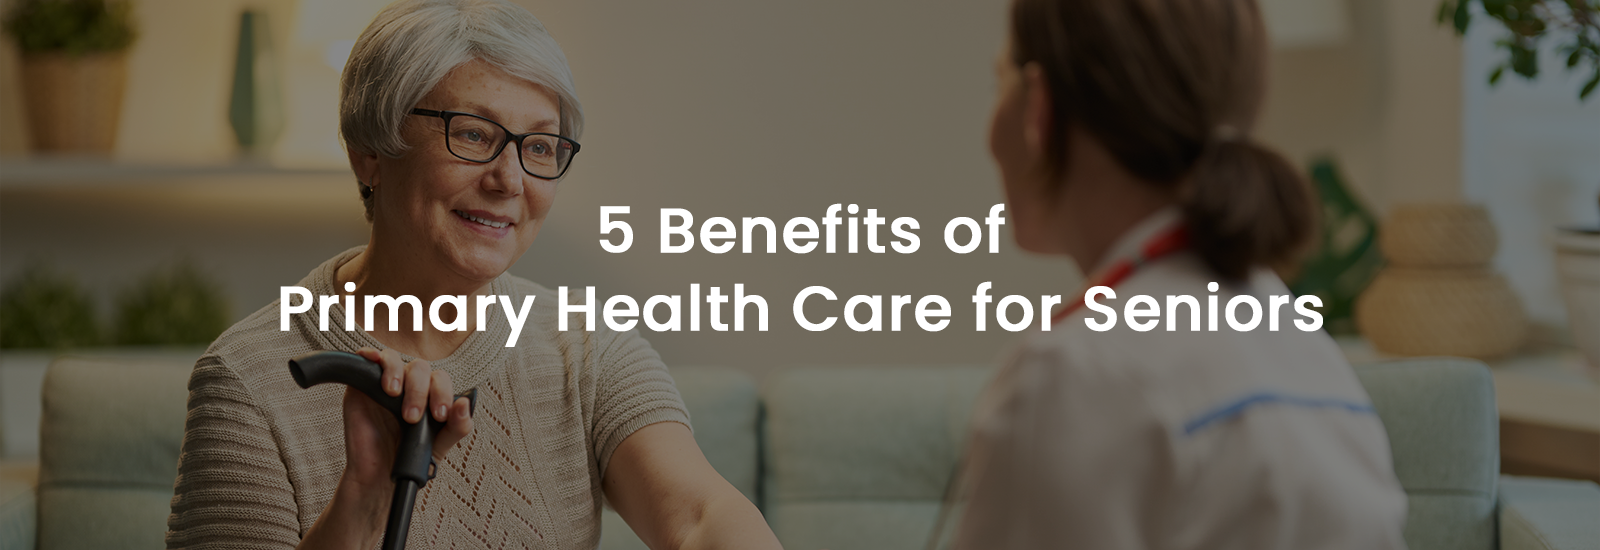 5 Benefits of Primary Health Care for Seniors | Banner Image